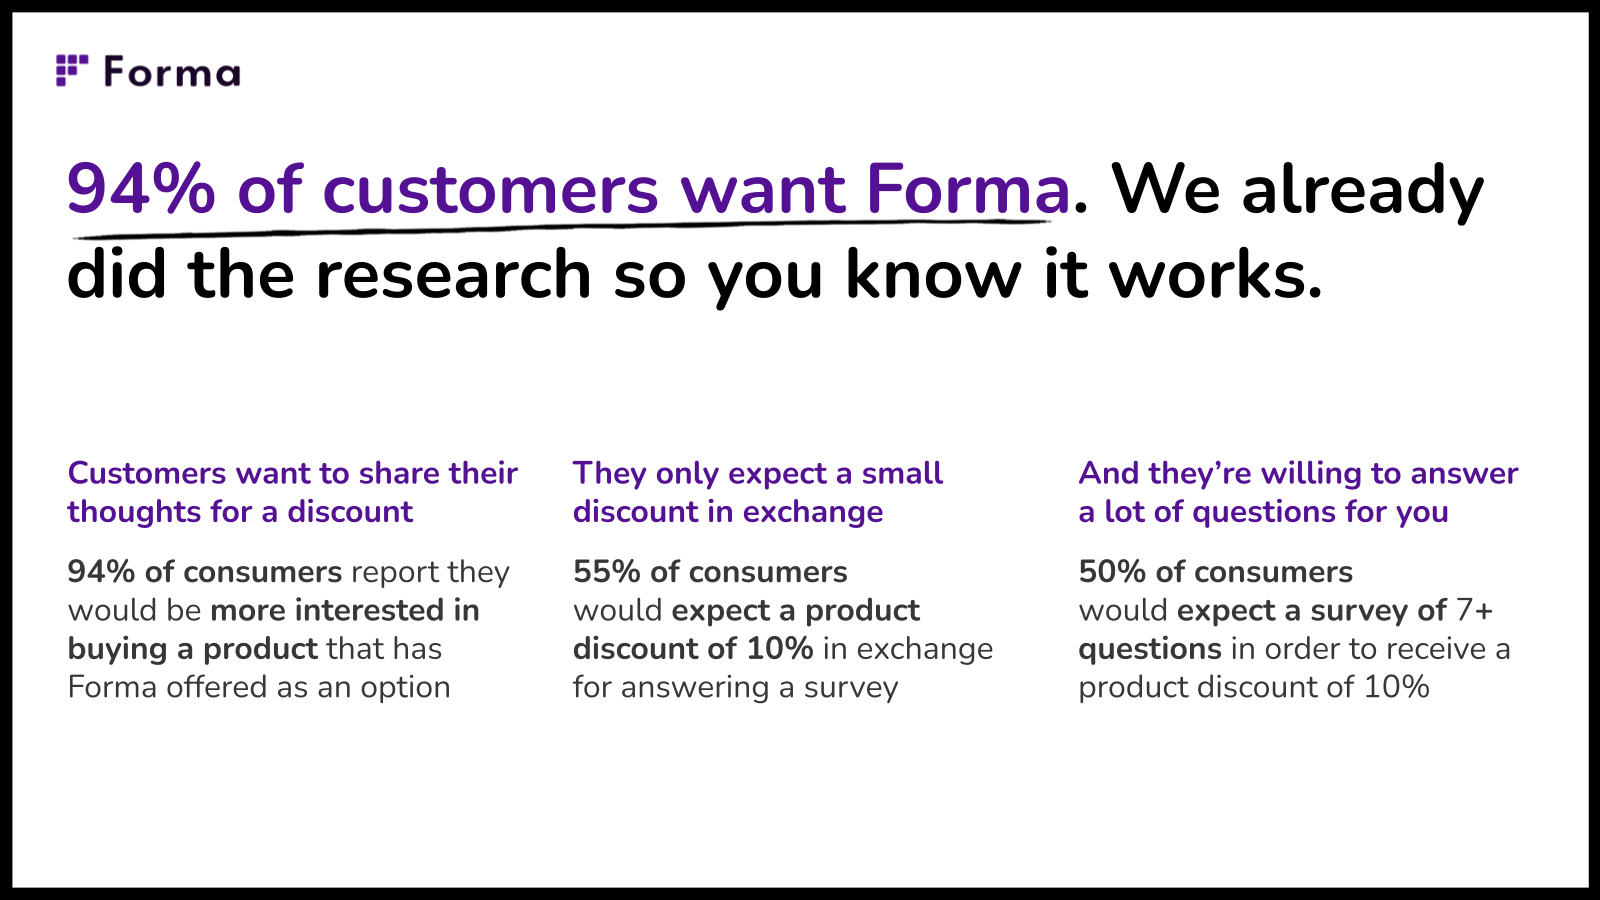 94% of customers want Forma. We did the research.